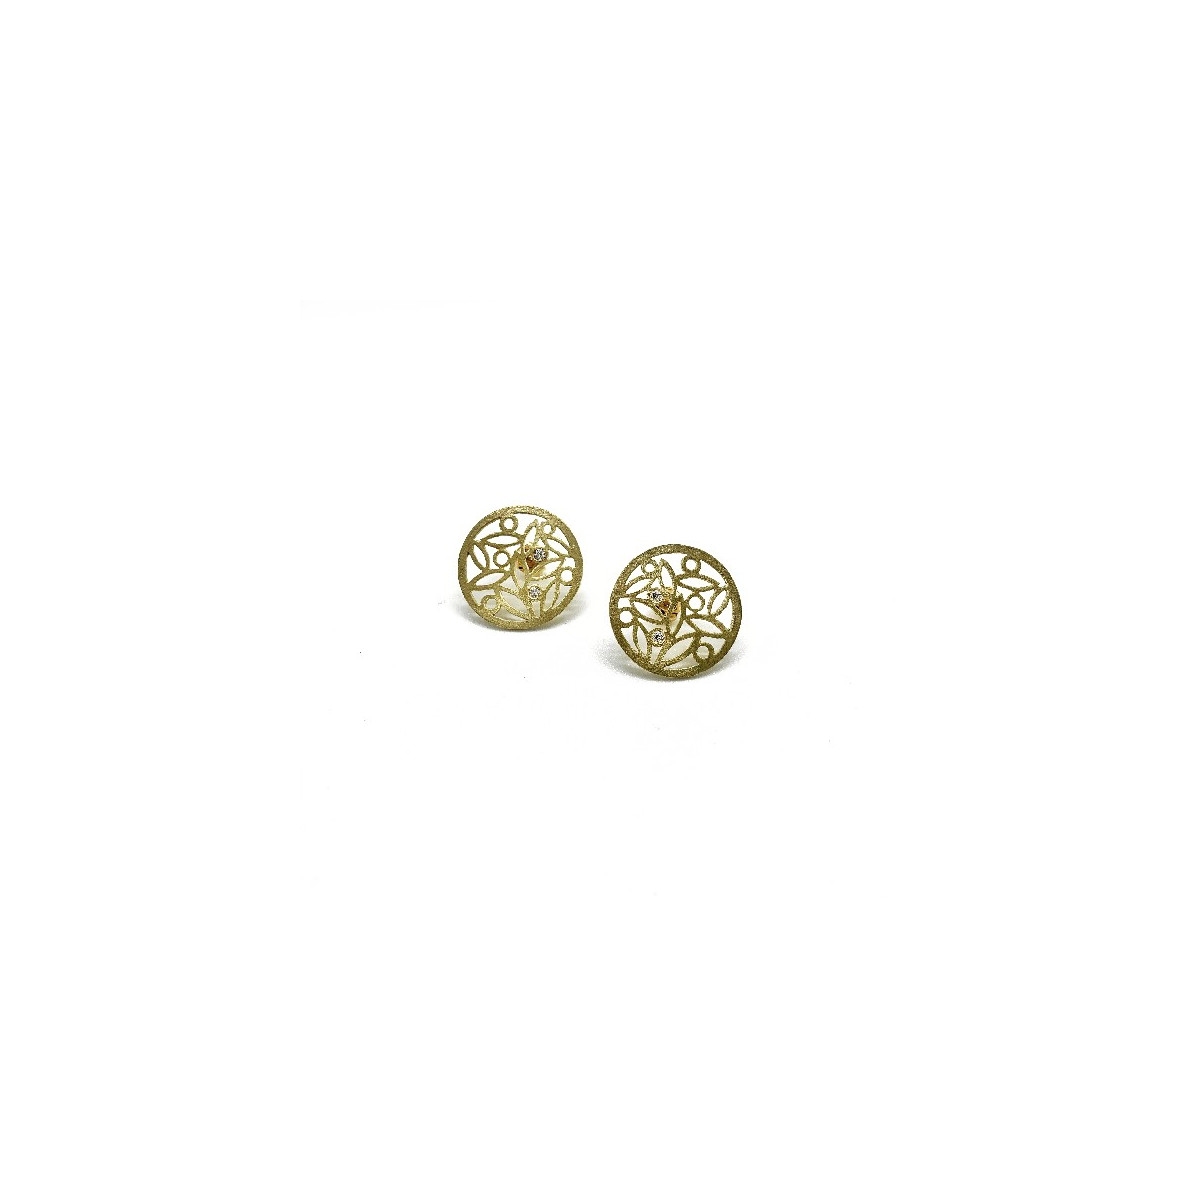 LEAVES CIRCLE CLIMENT 1890 EARRINGS - D-2508P3/BR